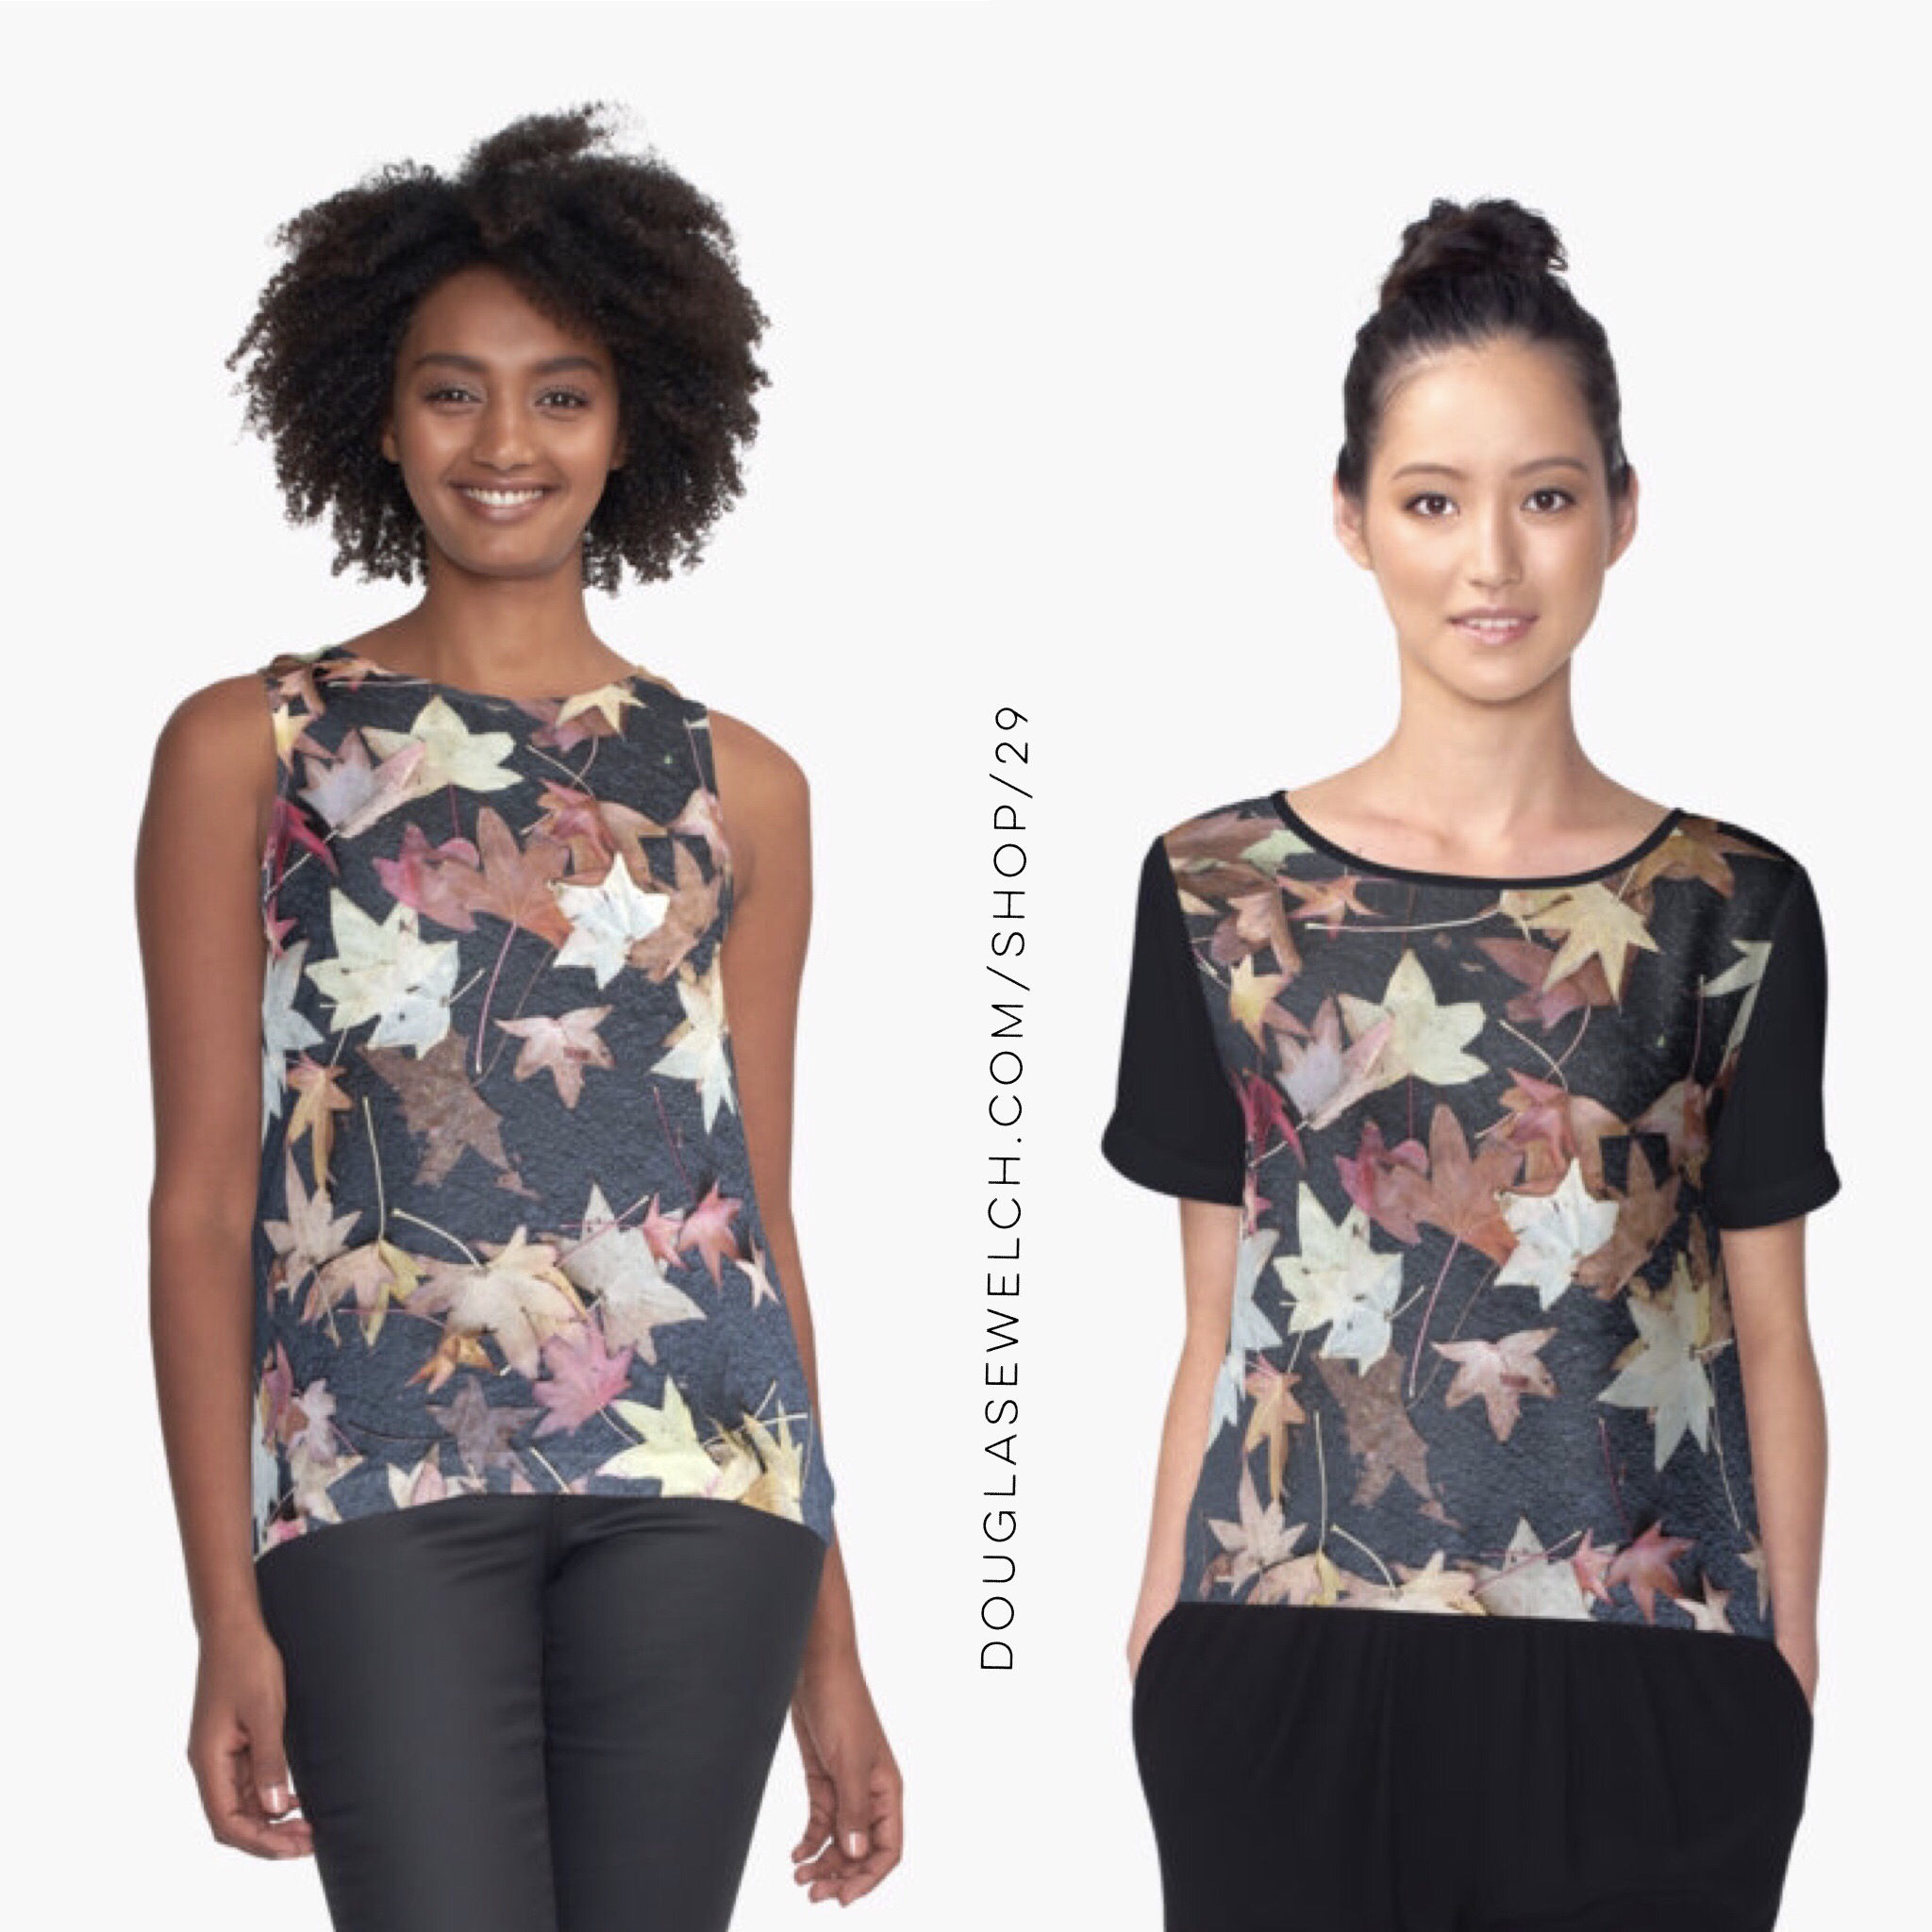 Add some natural beauty to your wardrobe with these “Autumn Leaves” Tops and Much More!